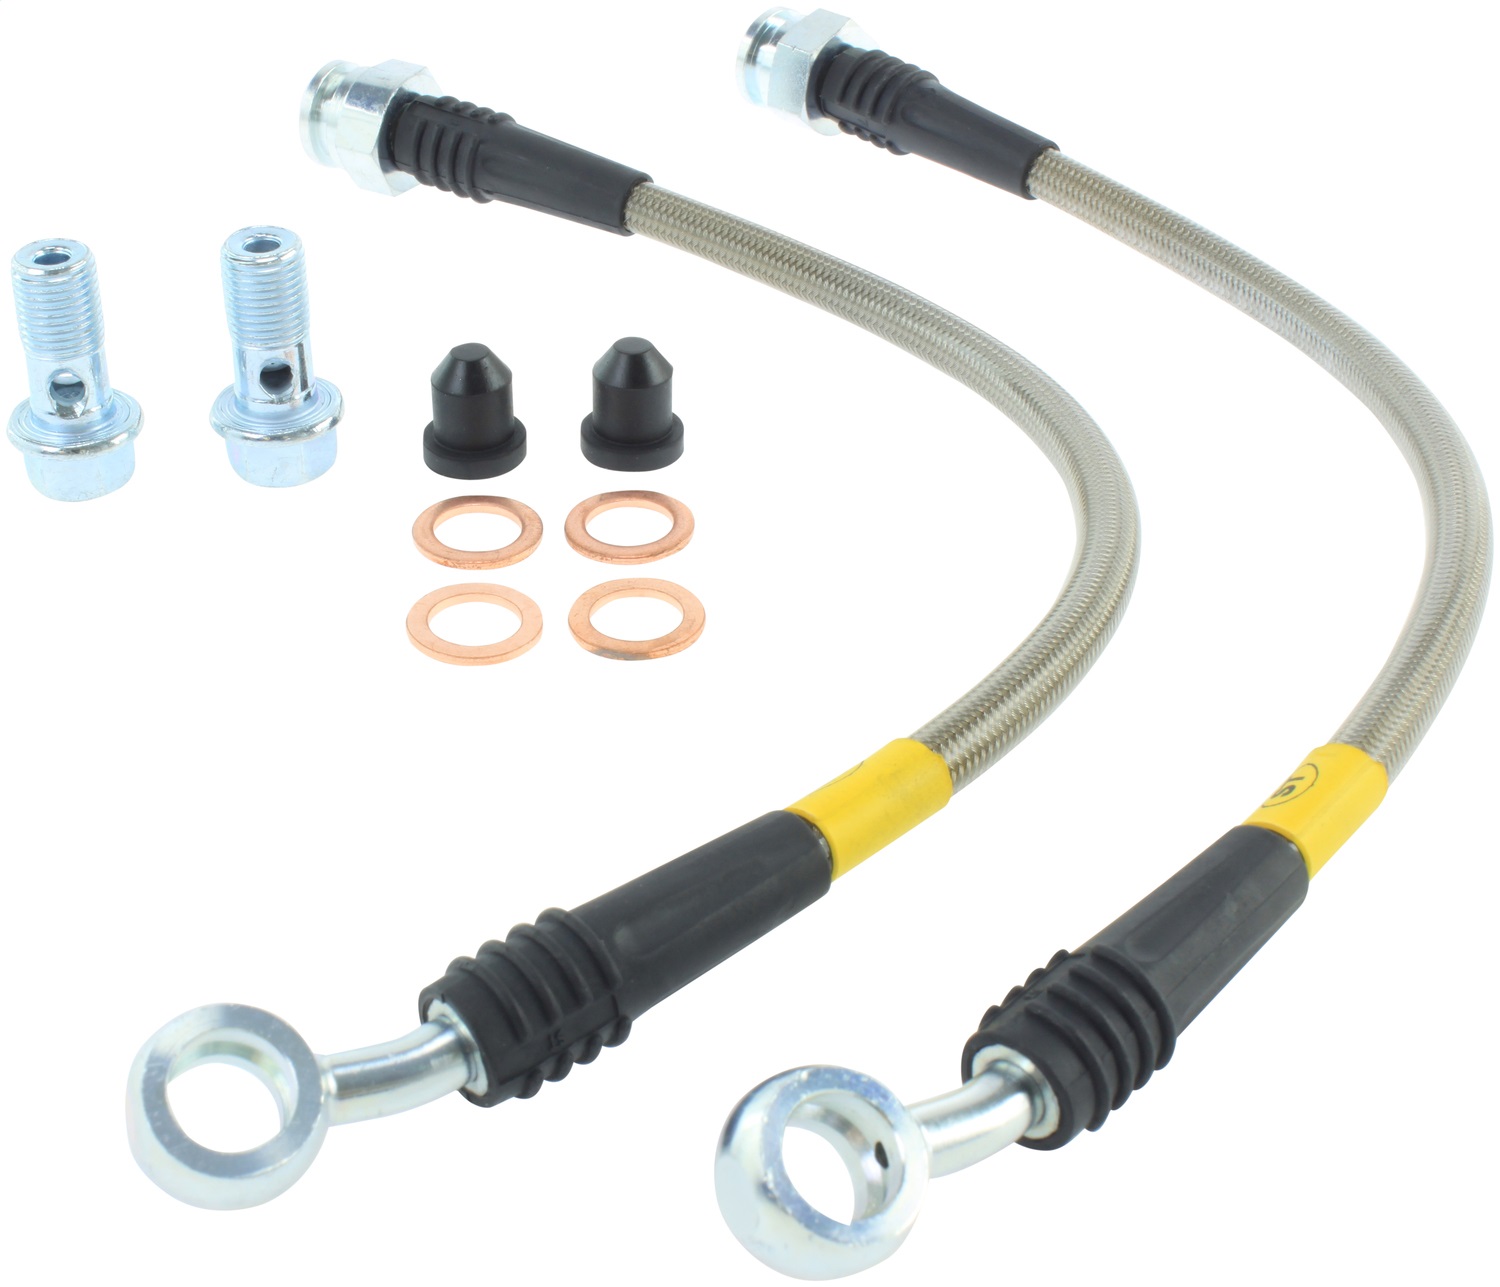 StopTech 950.45502 Stainless Steel Hose Set Fits 04-15 MX-5 Miata RX-8